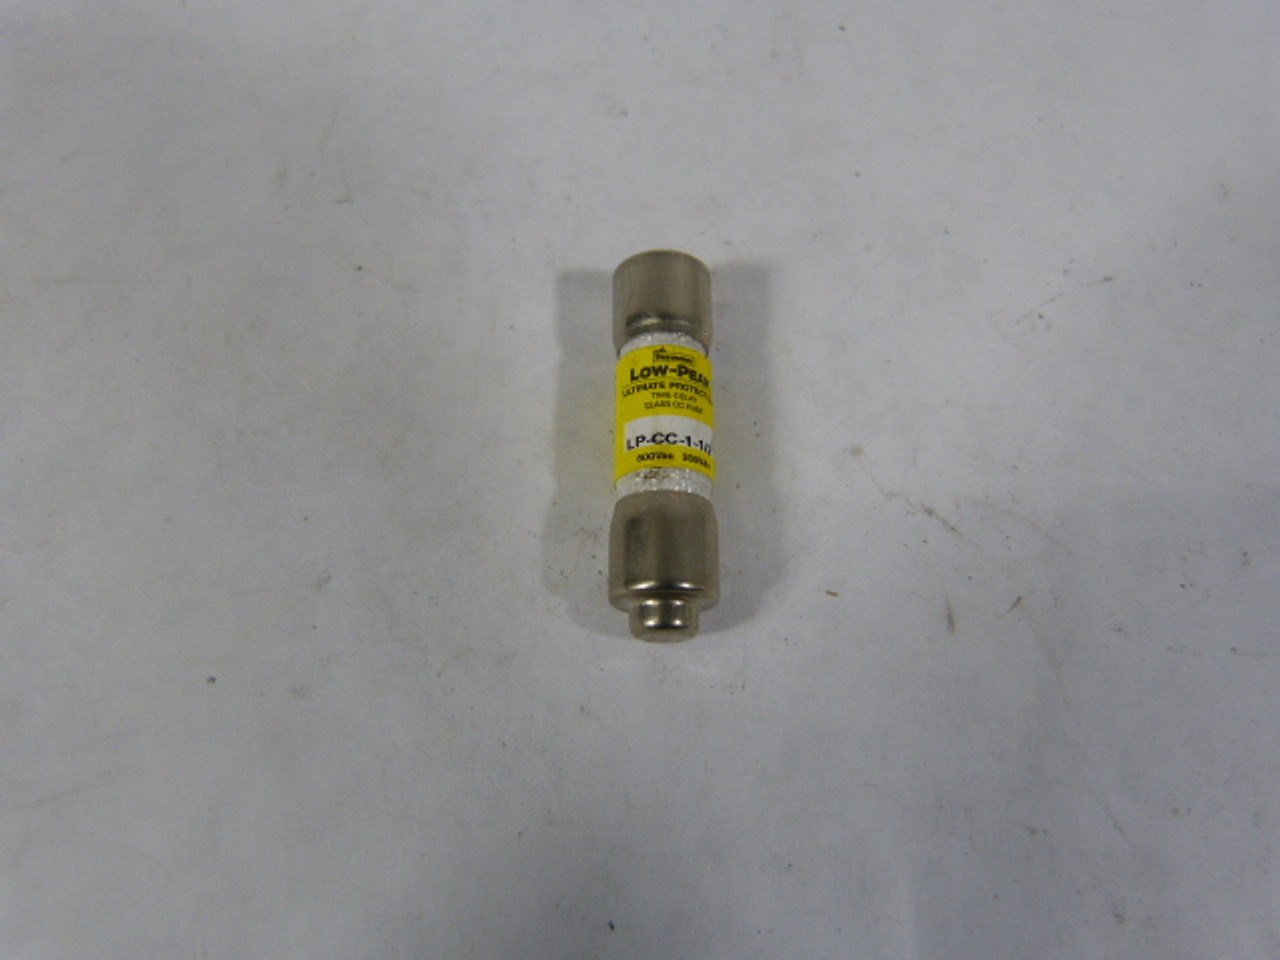 Low-Peak LP-CC-1-1/2 Time Delay Fuse 1-1/2A 600V USED